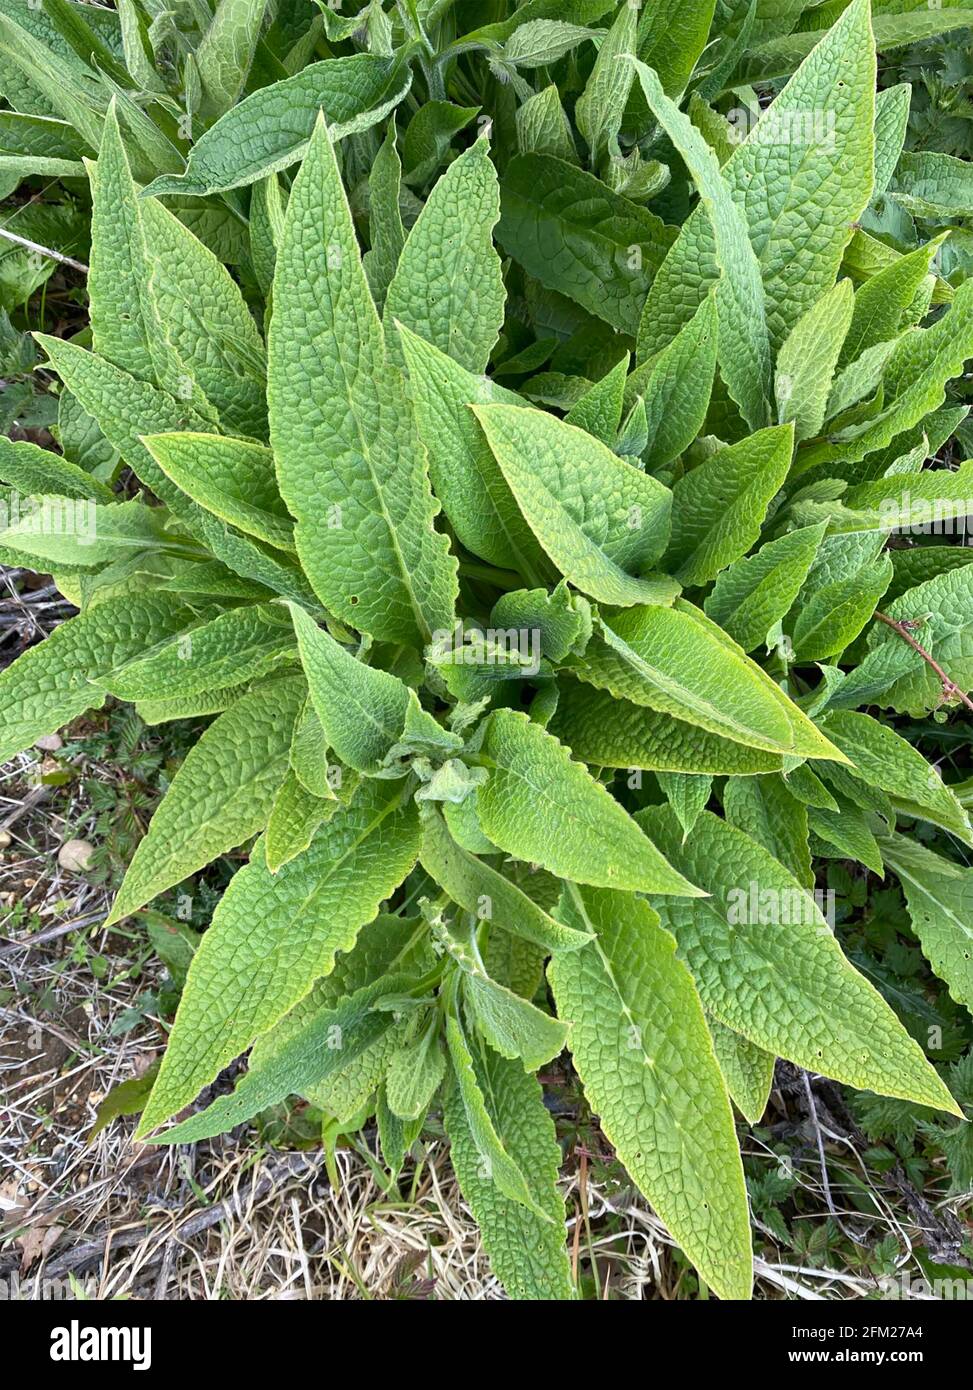 COMFREY  Symphytum A genus of flowering plants in the Borage family containing up to 35 species. Photo: Tony Gale Stock Photo